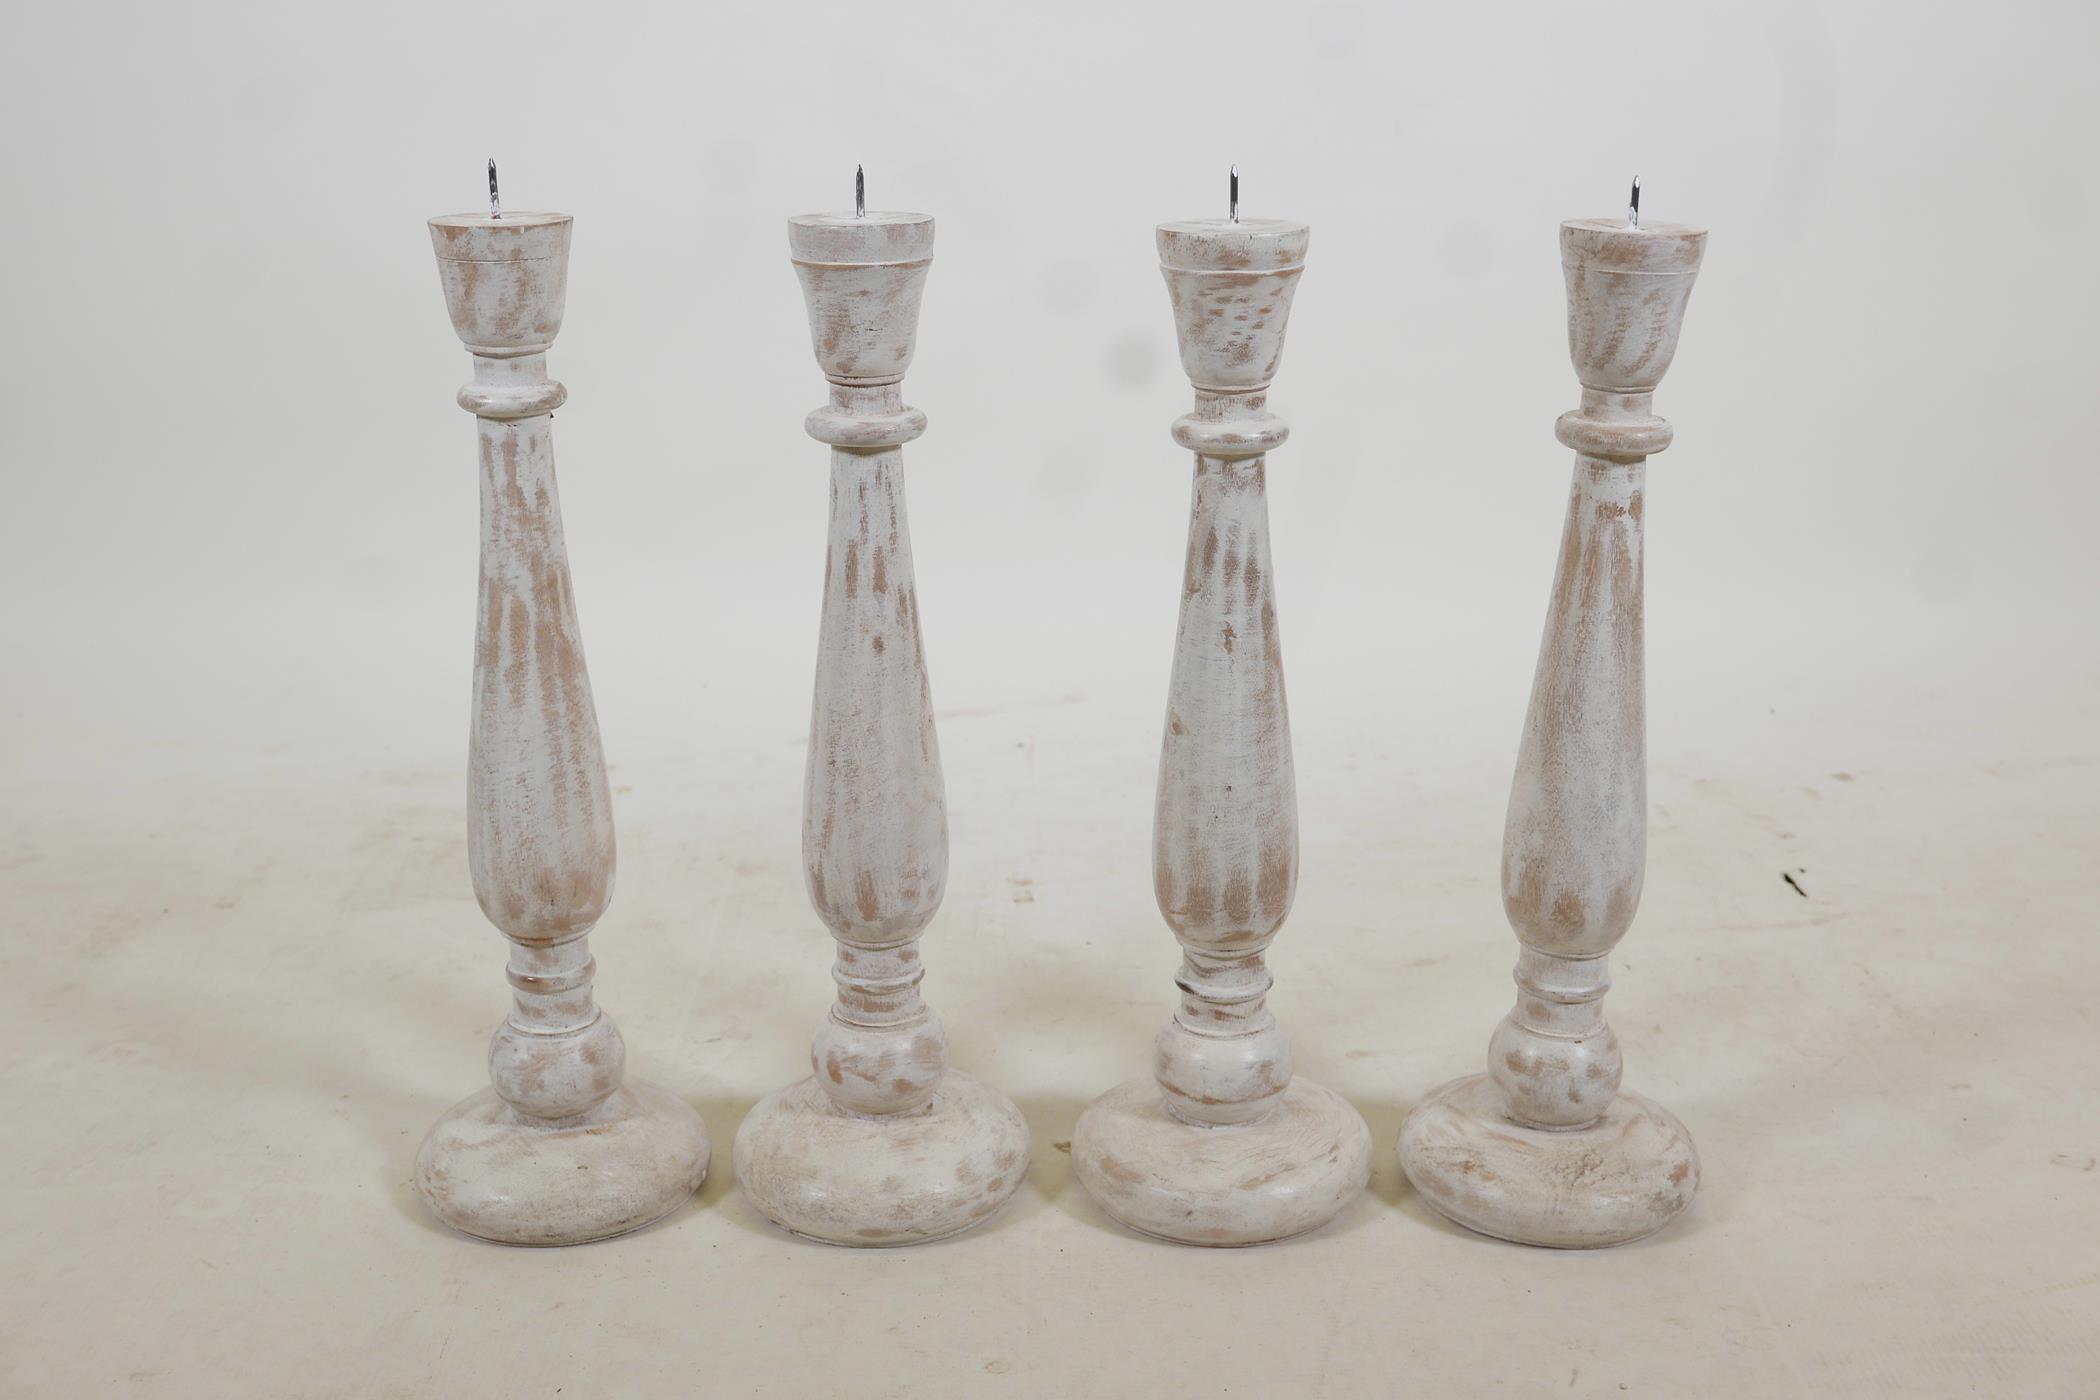 A set of four turned and painted wood pricket candlesticks with a distressed finish, 19" high